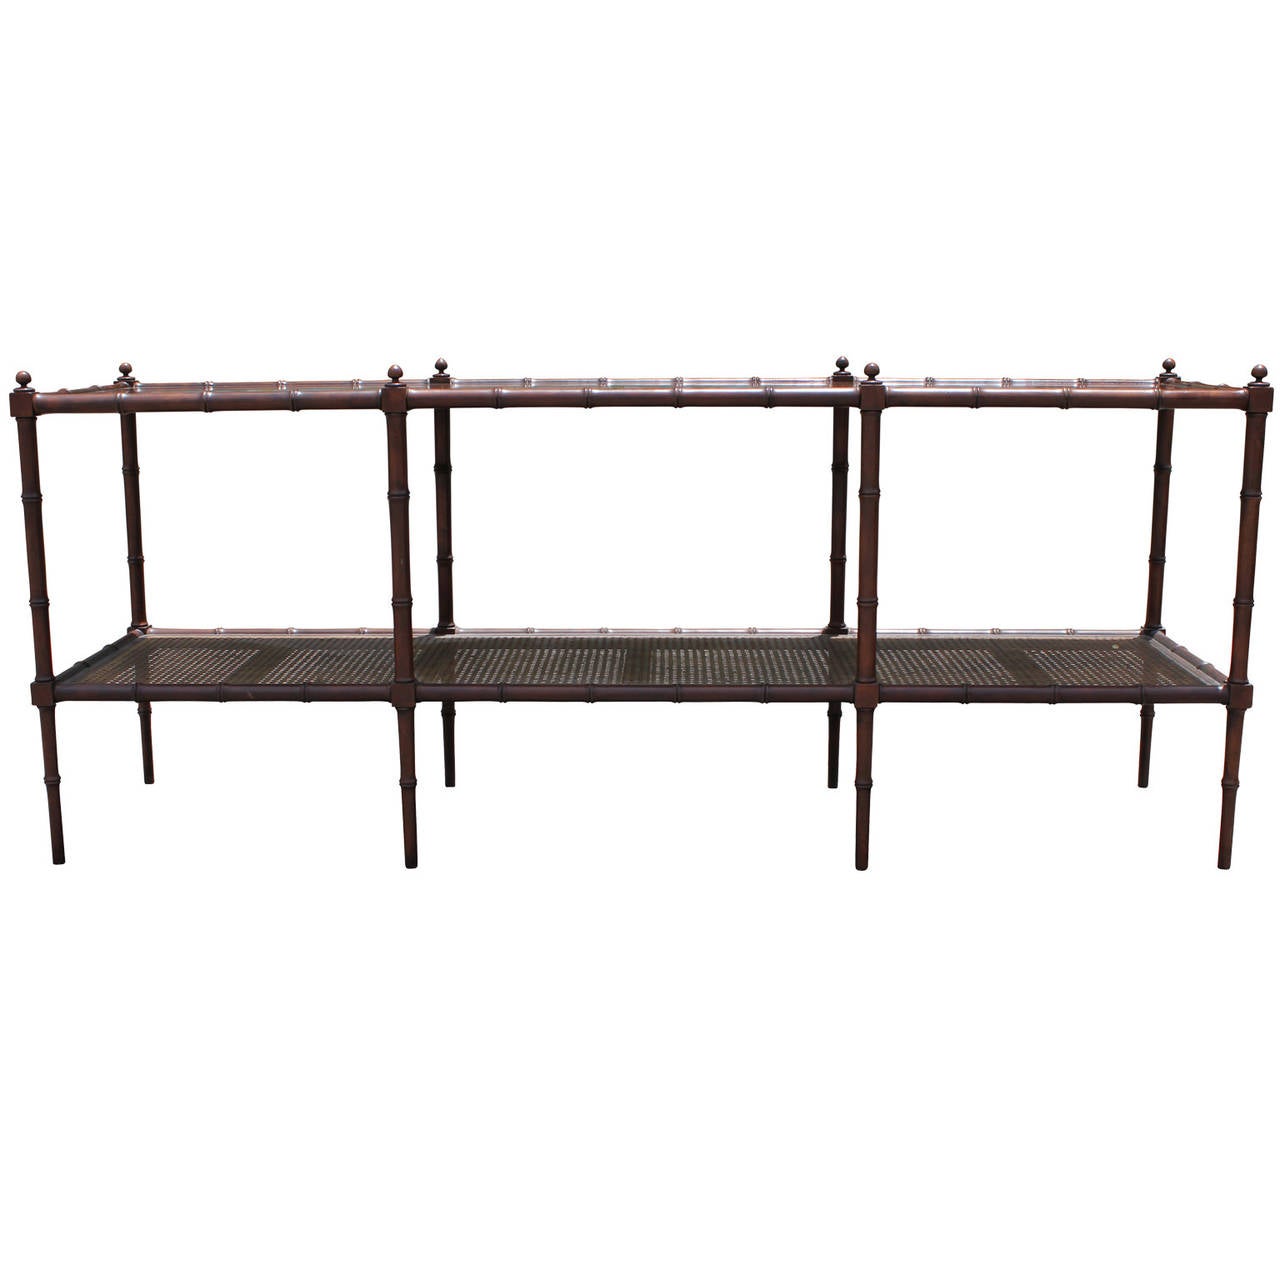 Great console table, sofa table, or shelf by Baker. Table has eight delicate faux bamboo legs topped with round finials. A single cane shelf provides storage. Table top has a lovely walnut grain. In beautiful vintage condition.